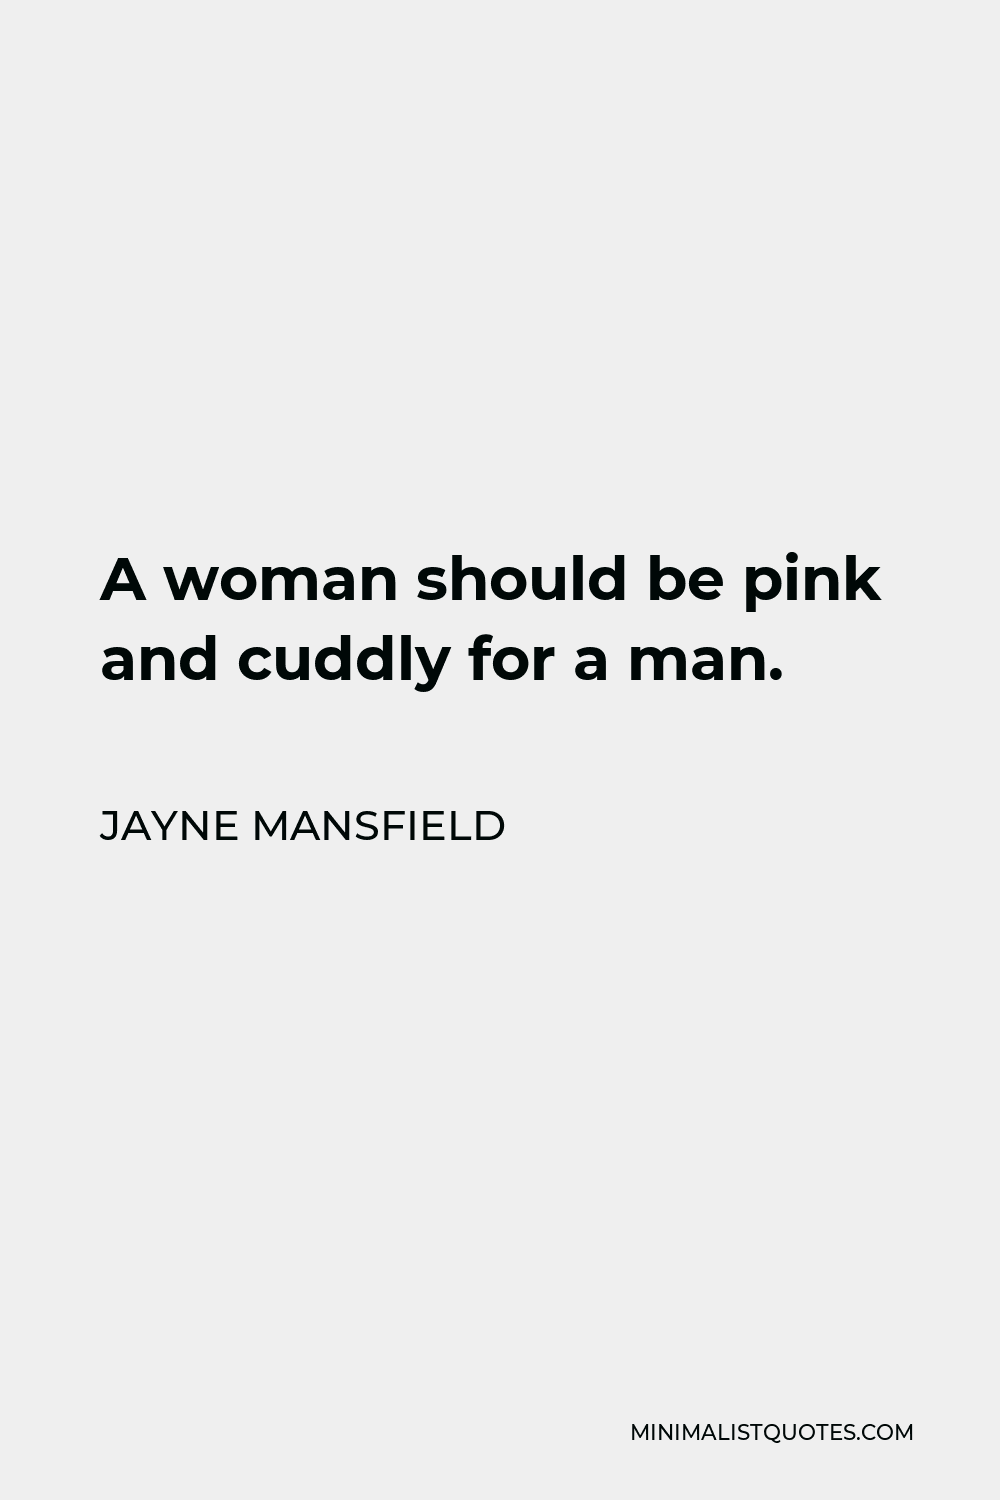 Jayne Mansfield Quote - A woman should be pink and cuddly for a man.